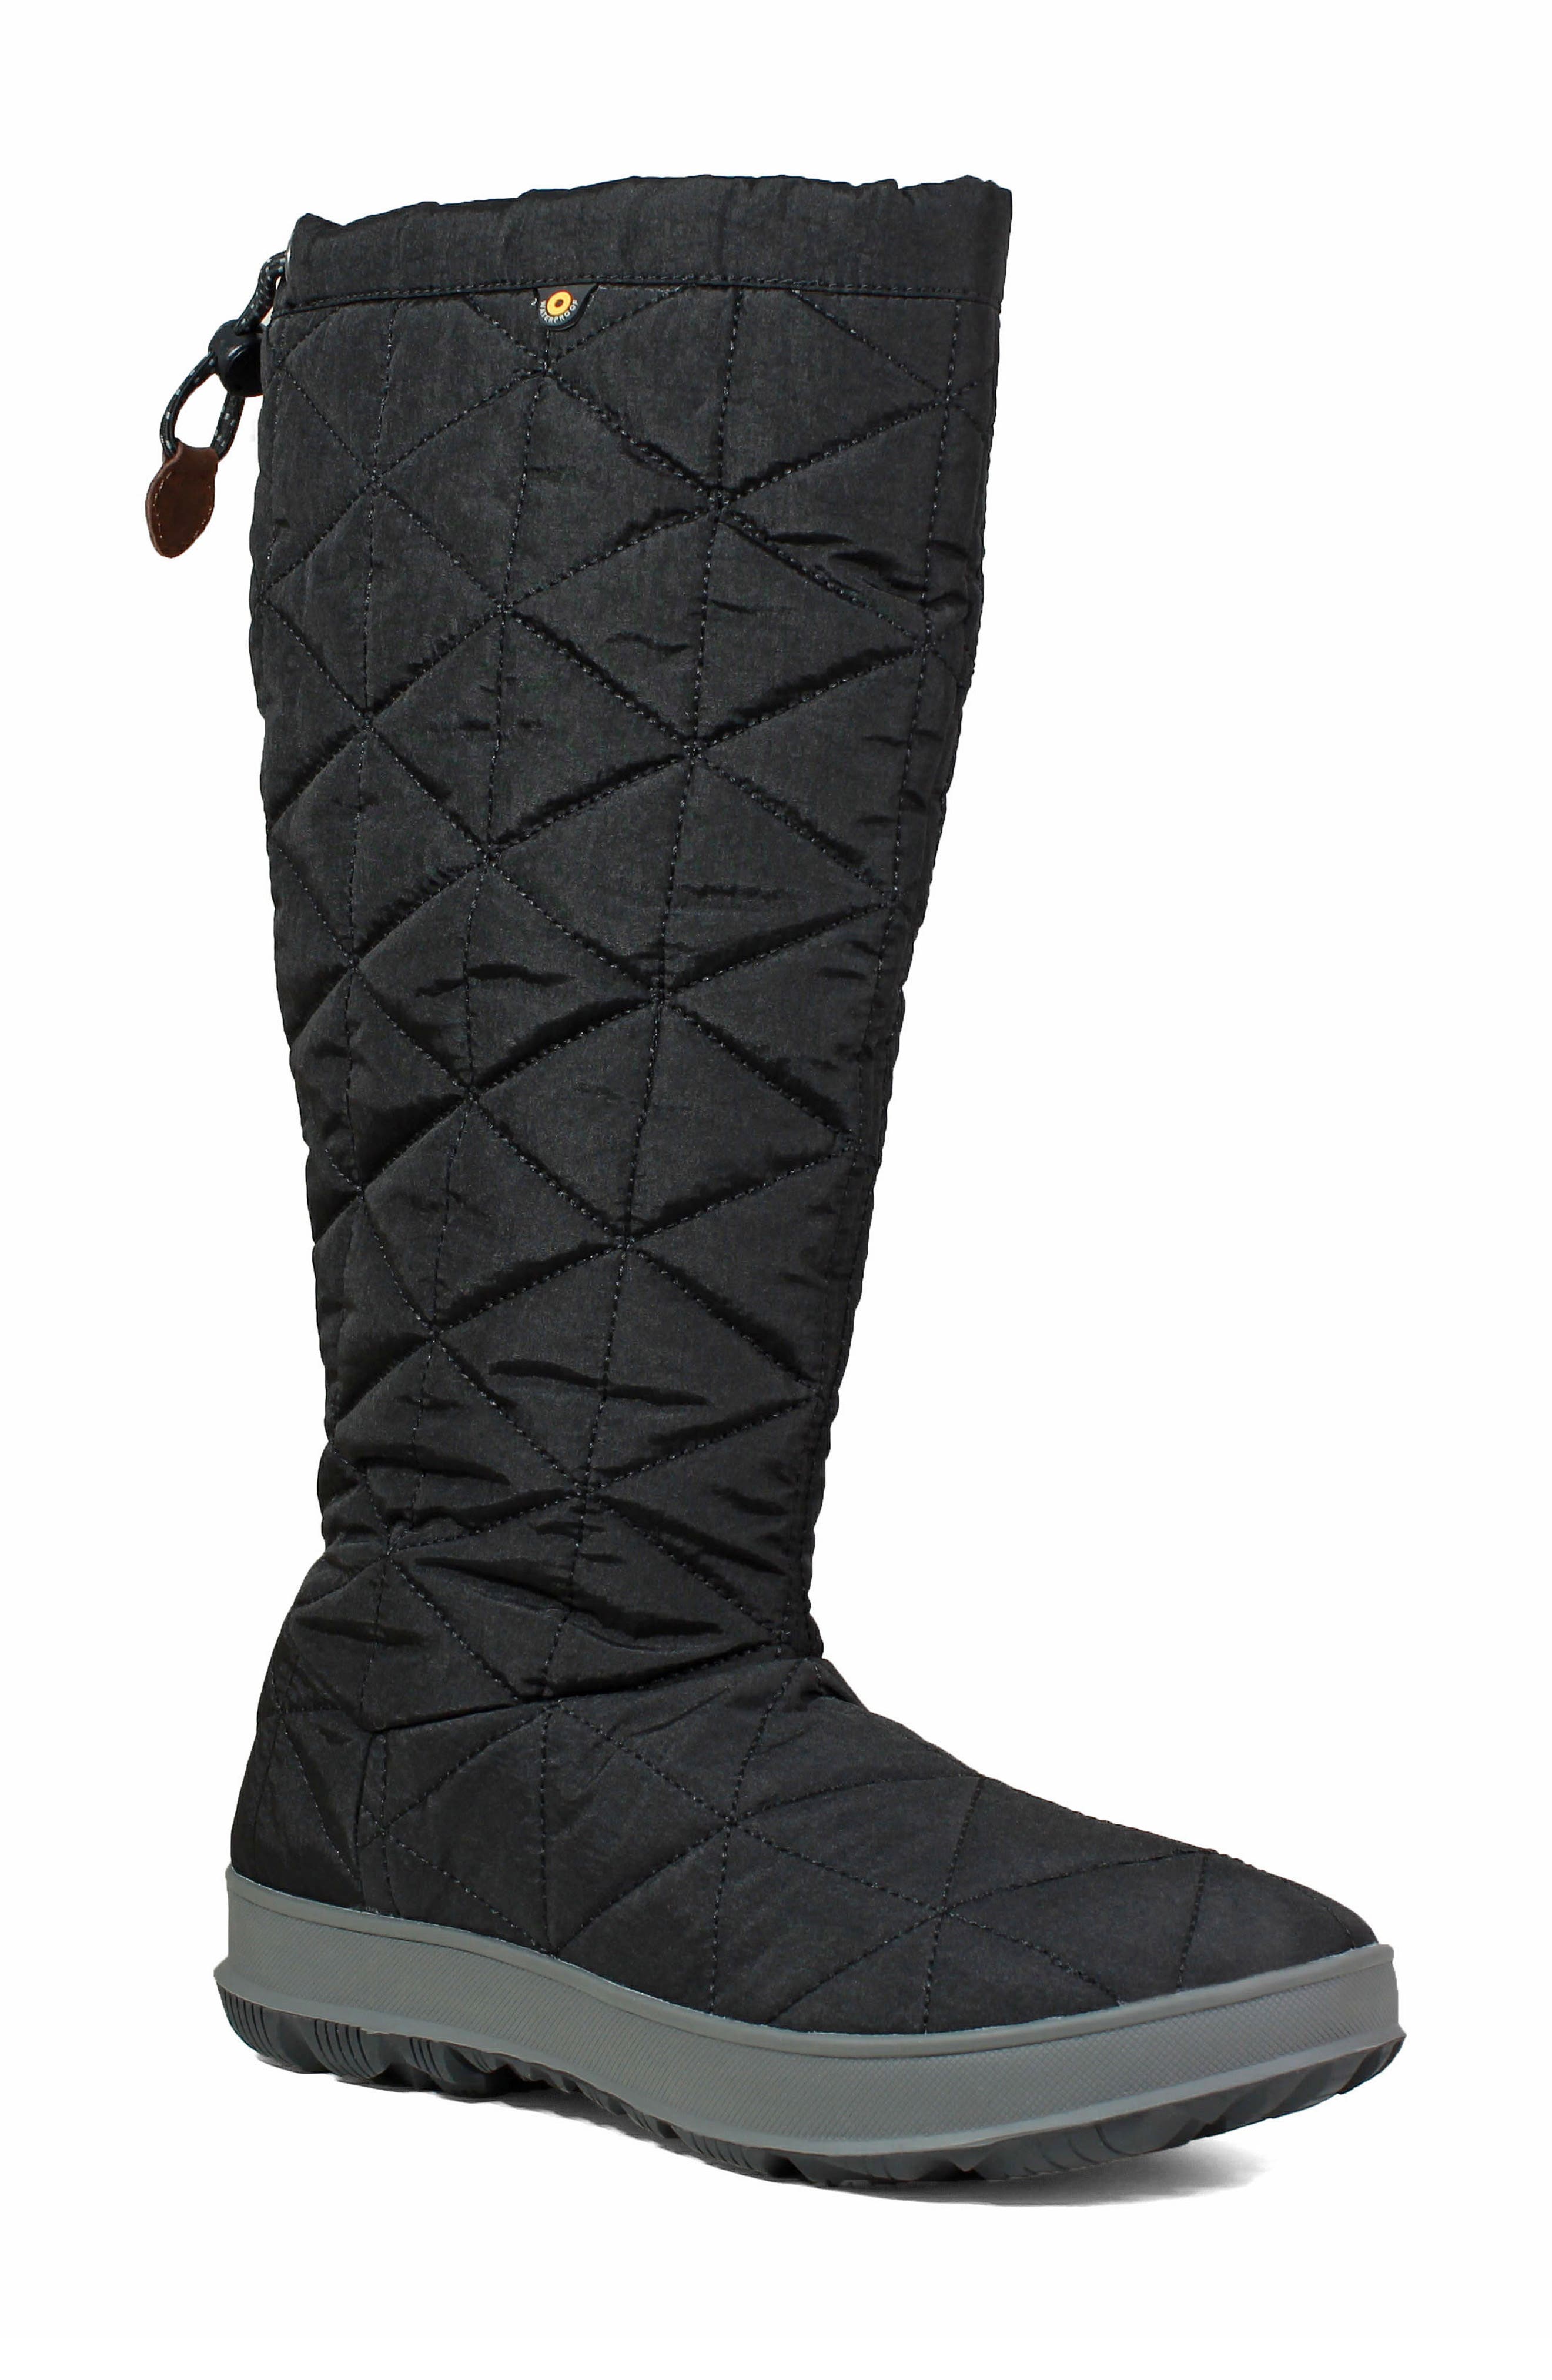 bogs snow boots womens